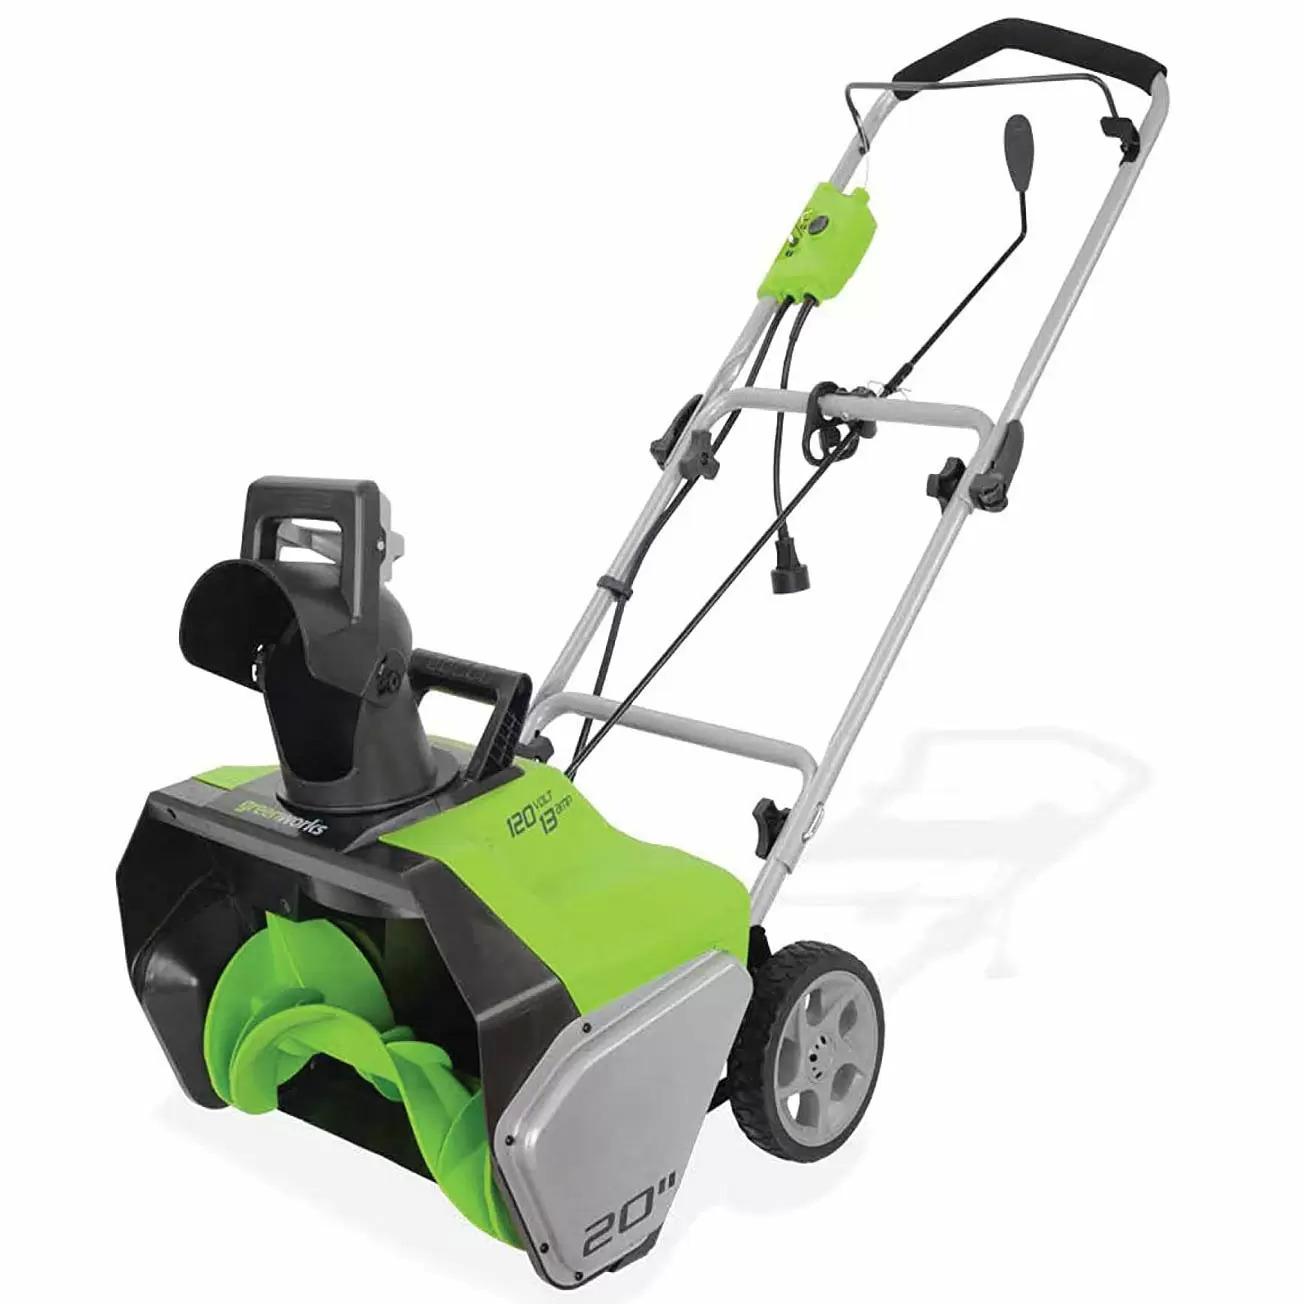 Greenworks 20in 13A Corded Snow Thrower for $100 Shipped